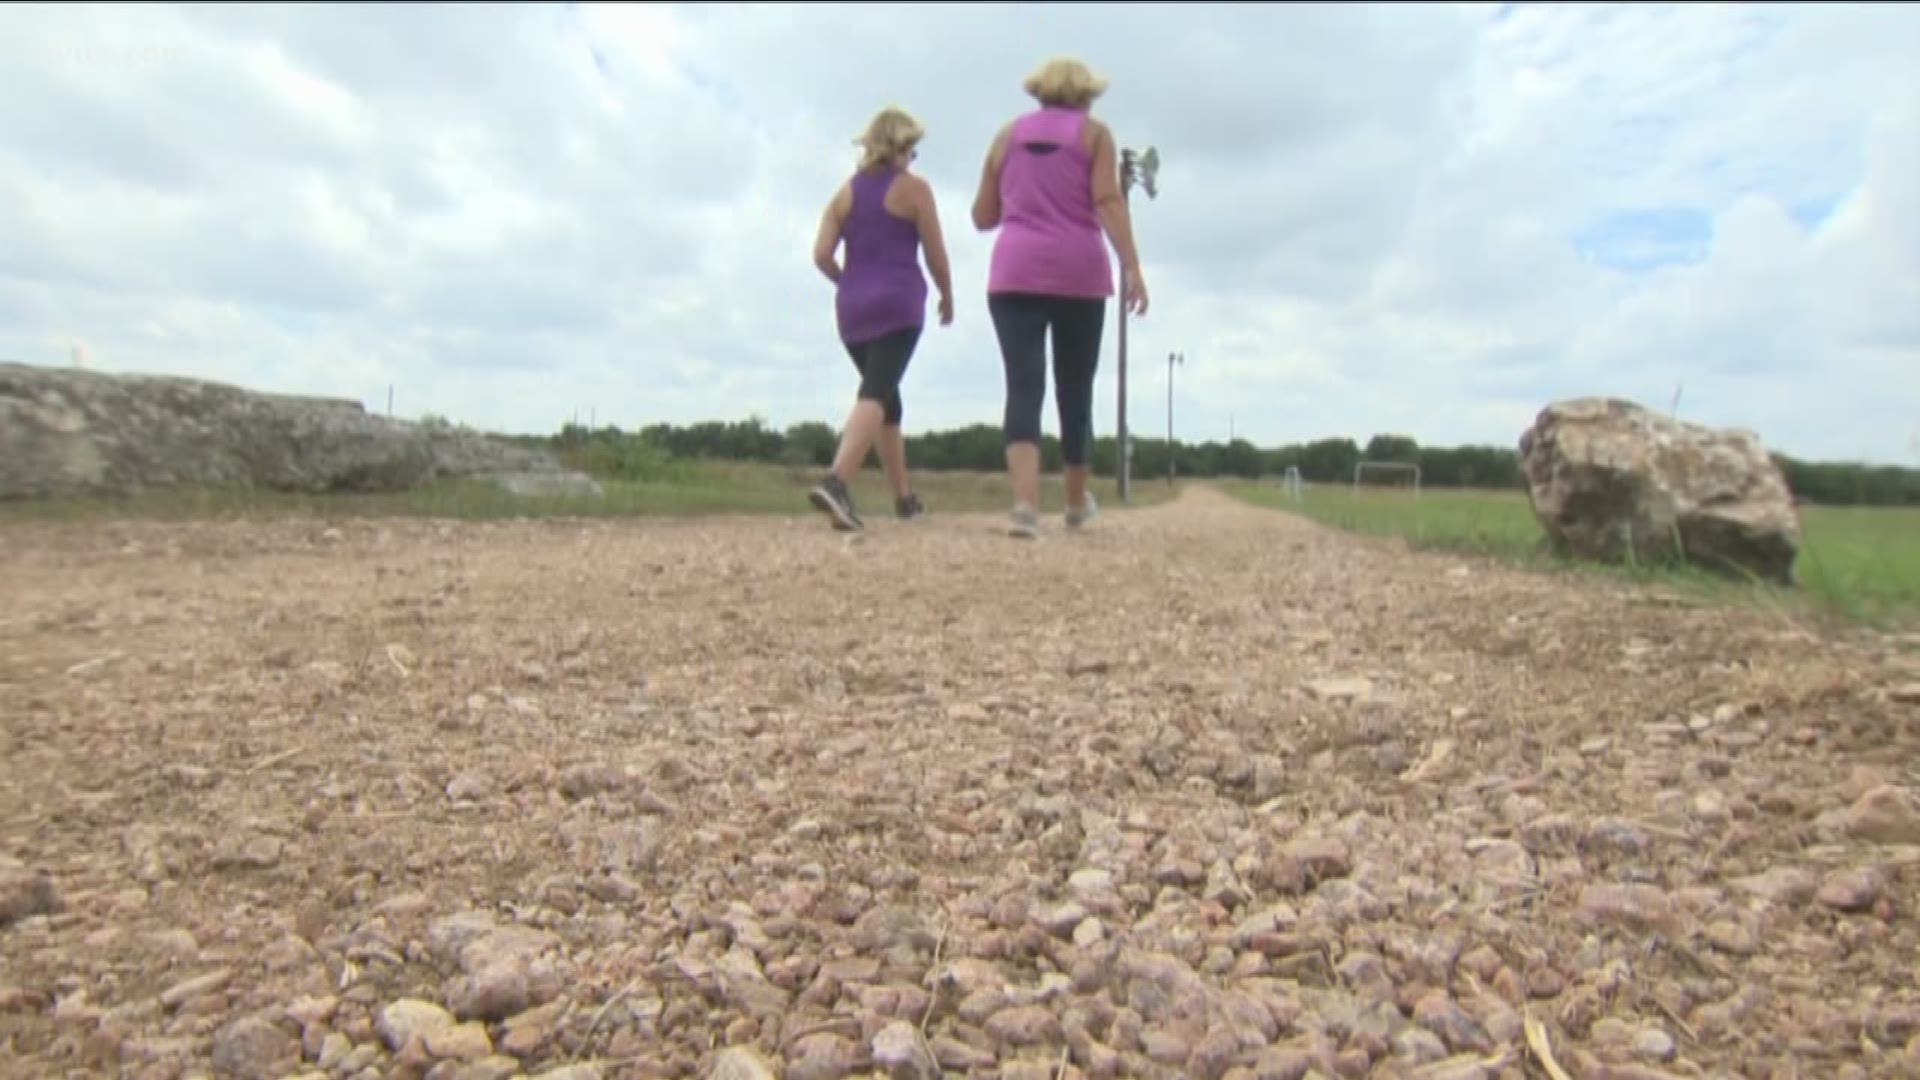 A running club in Dripping Springs thought a  trail wasn't as good as it could be, so they took matters into their own hands to help the City make changes.